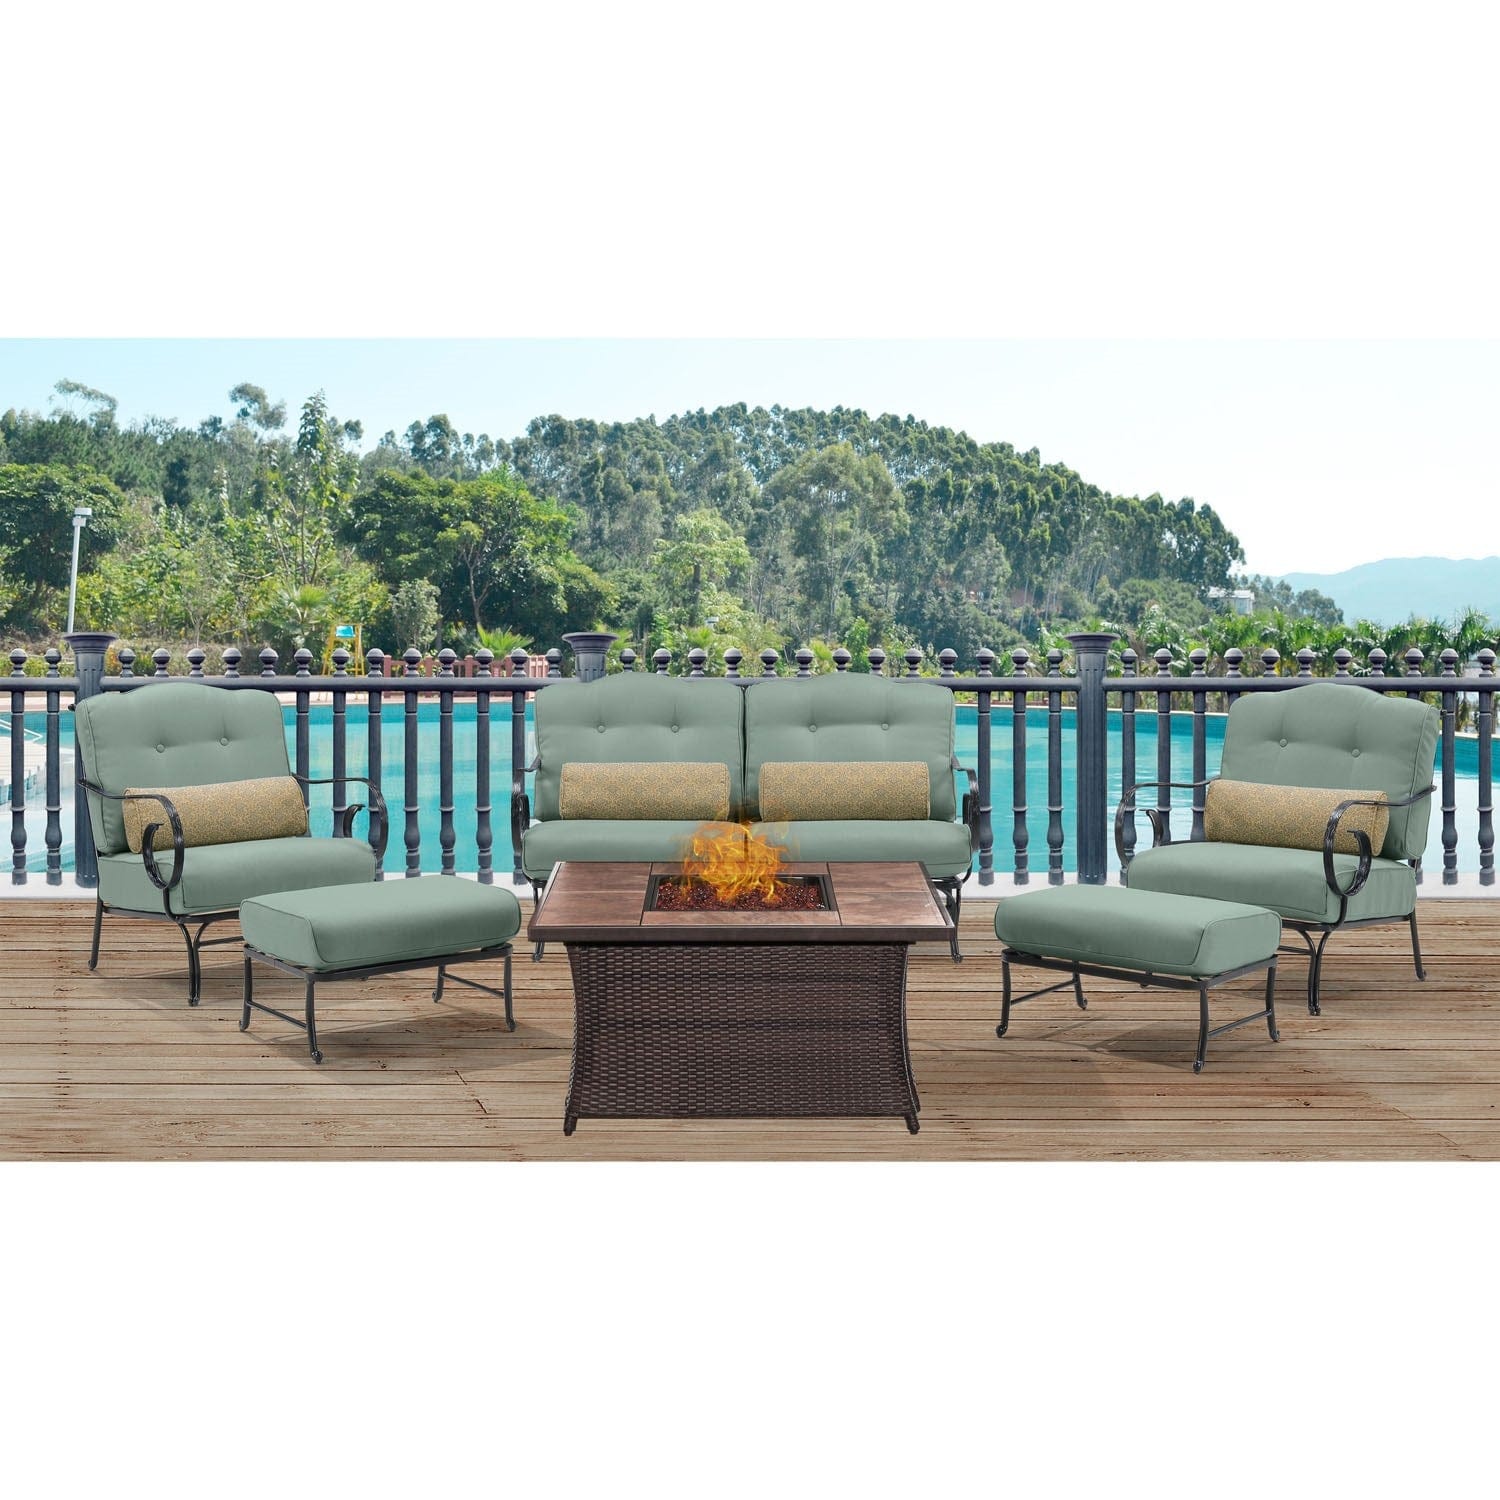 Hanover Fire Table Dining Set Hanover - Oceana 6pc Fire Pit Set with Tan Tile Top | OCE6PCFP-BLU-TN